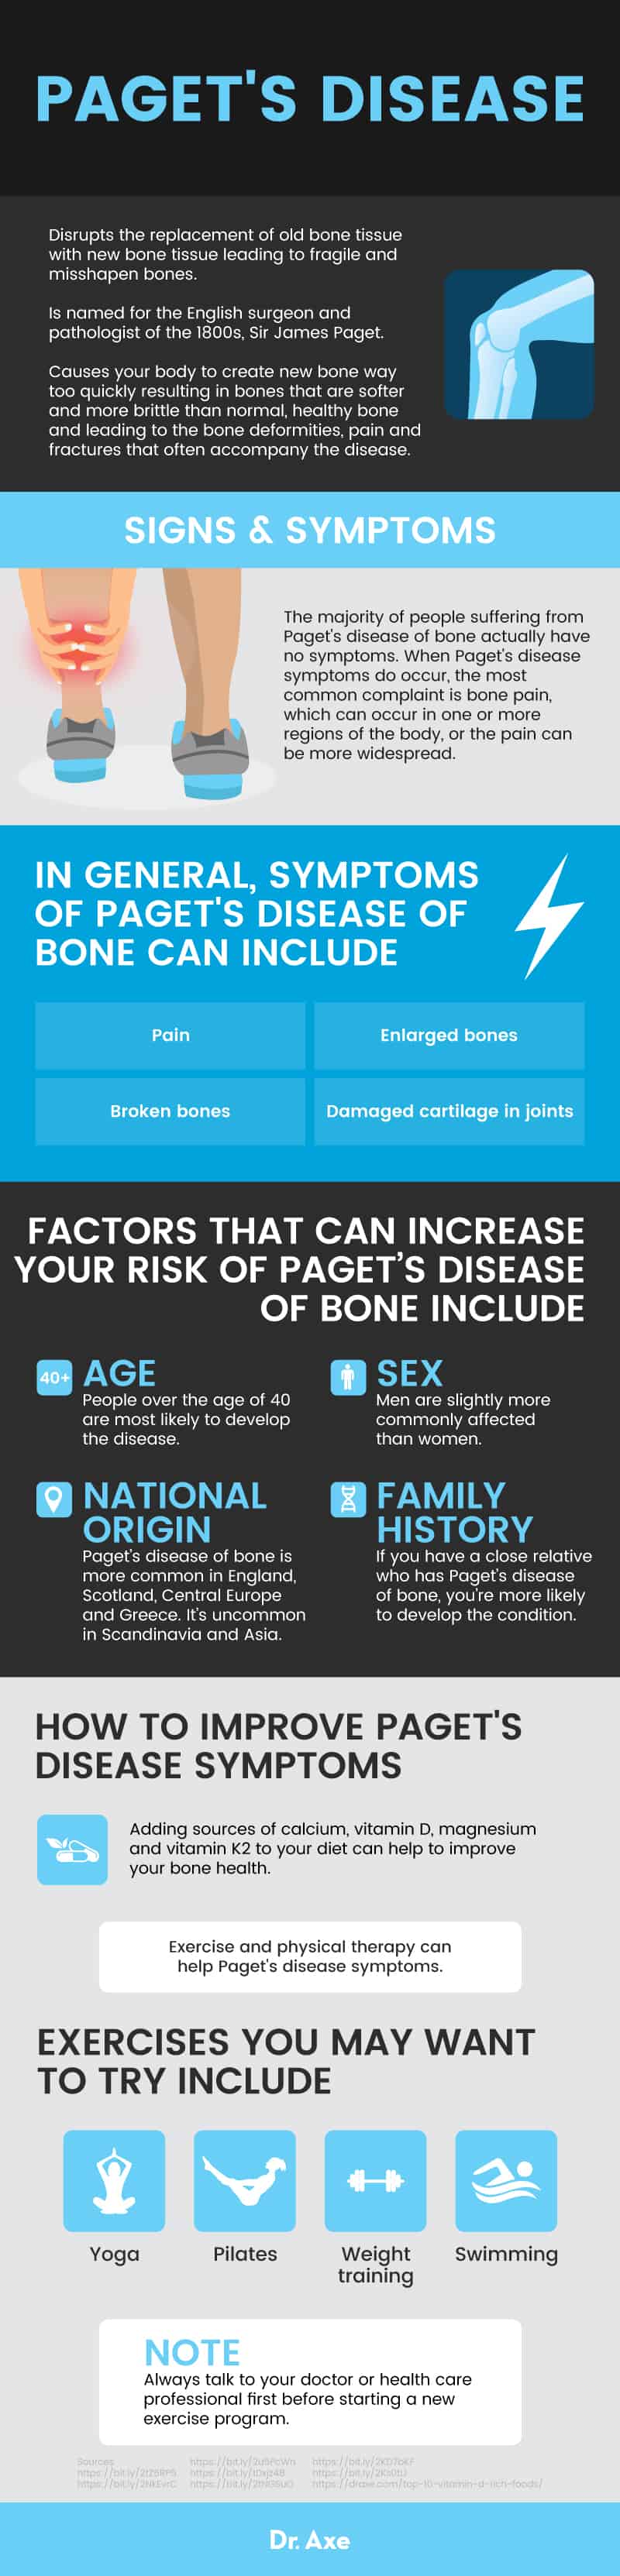 Paget's disease - Dr. Axe